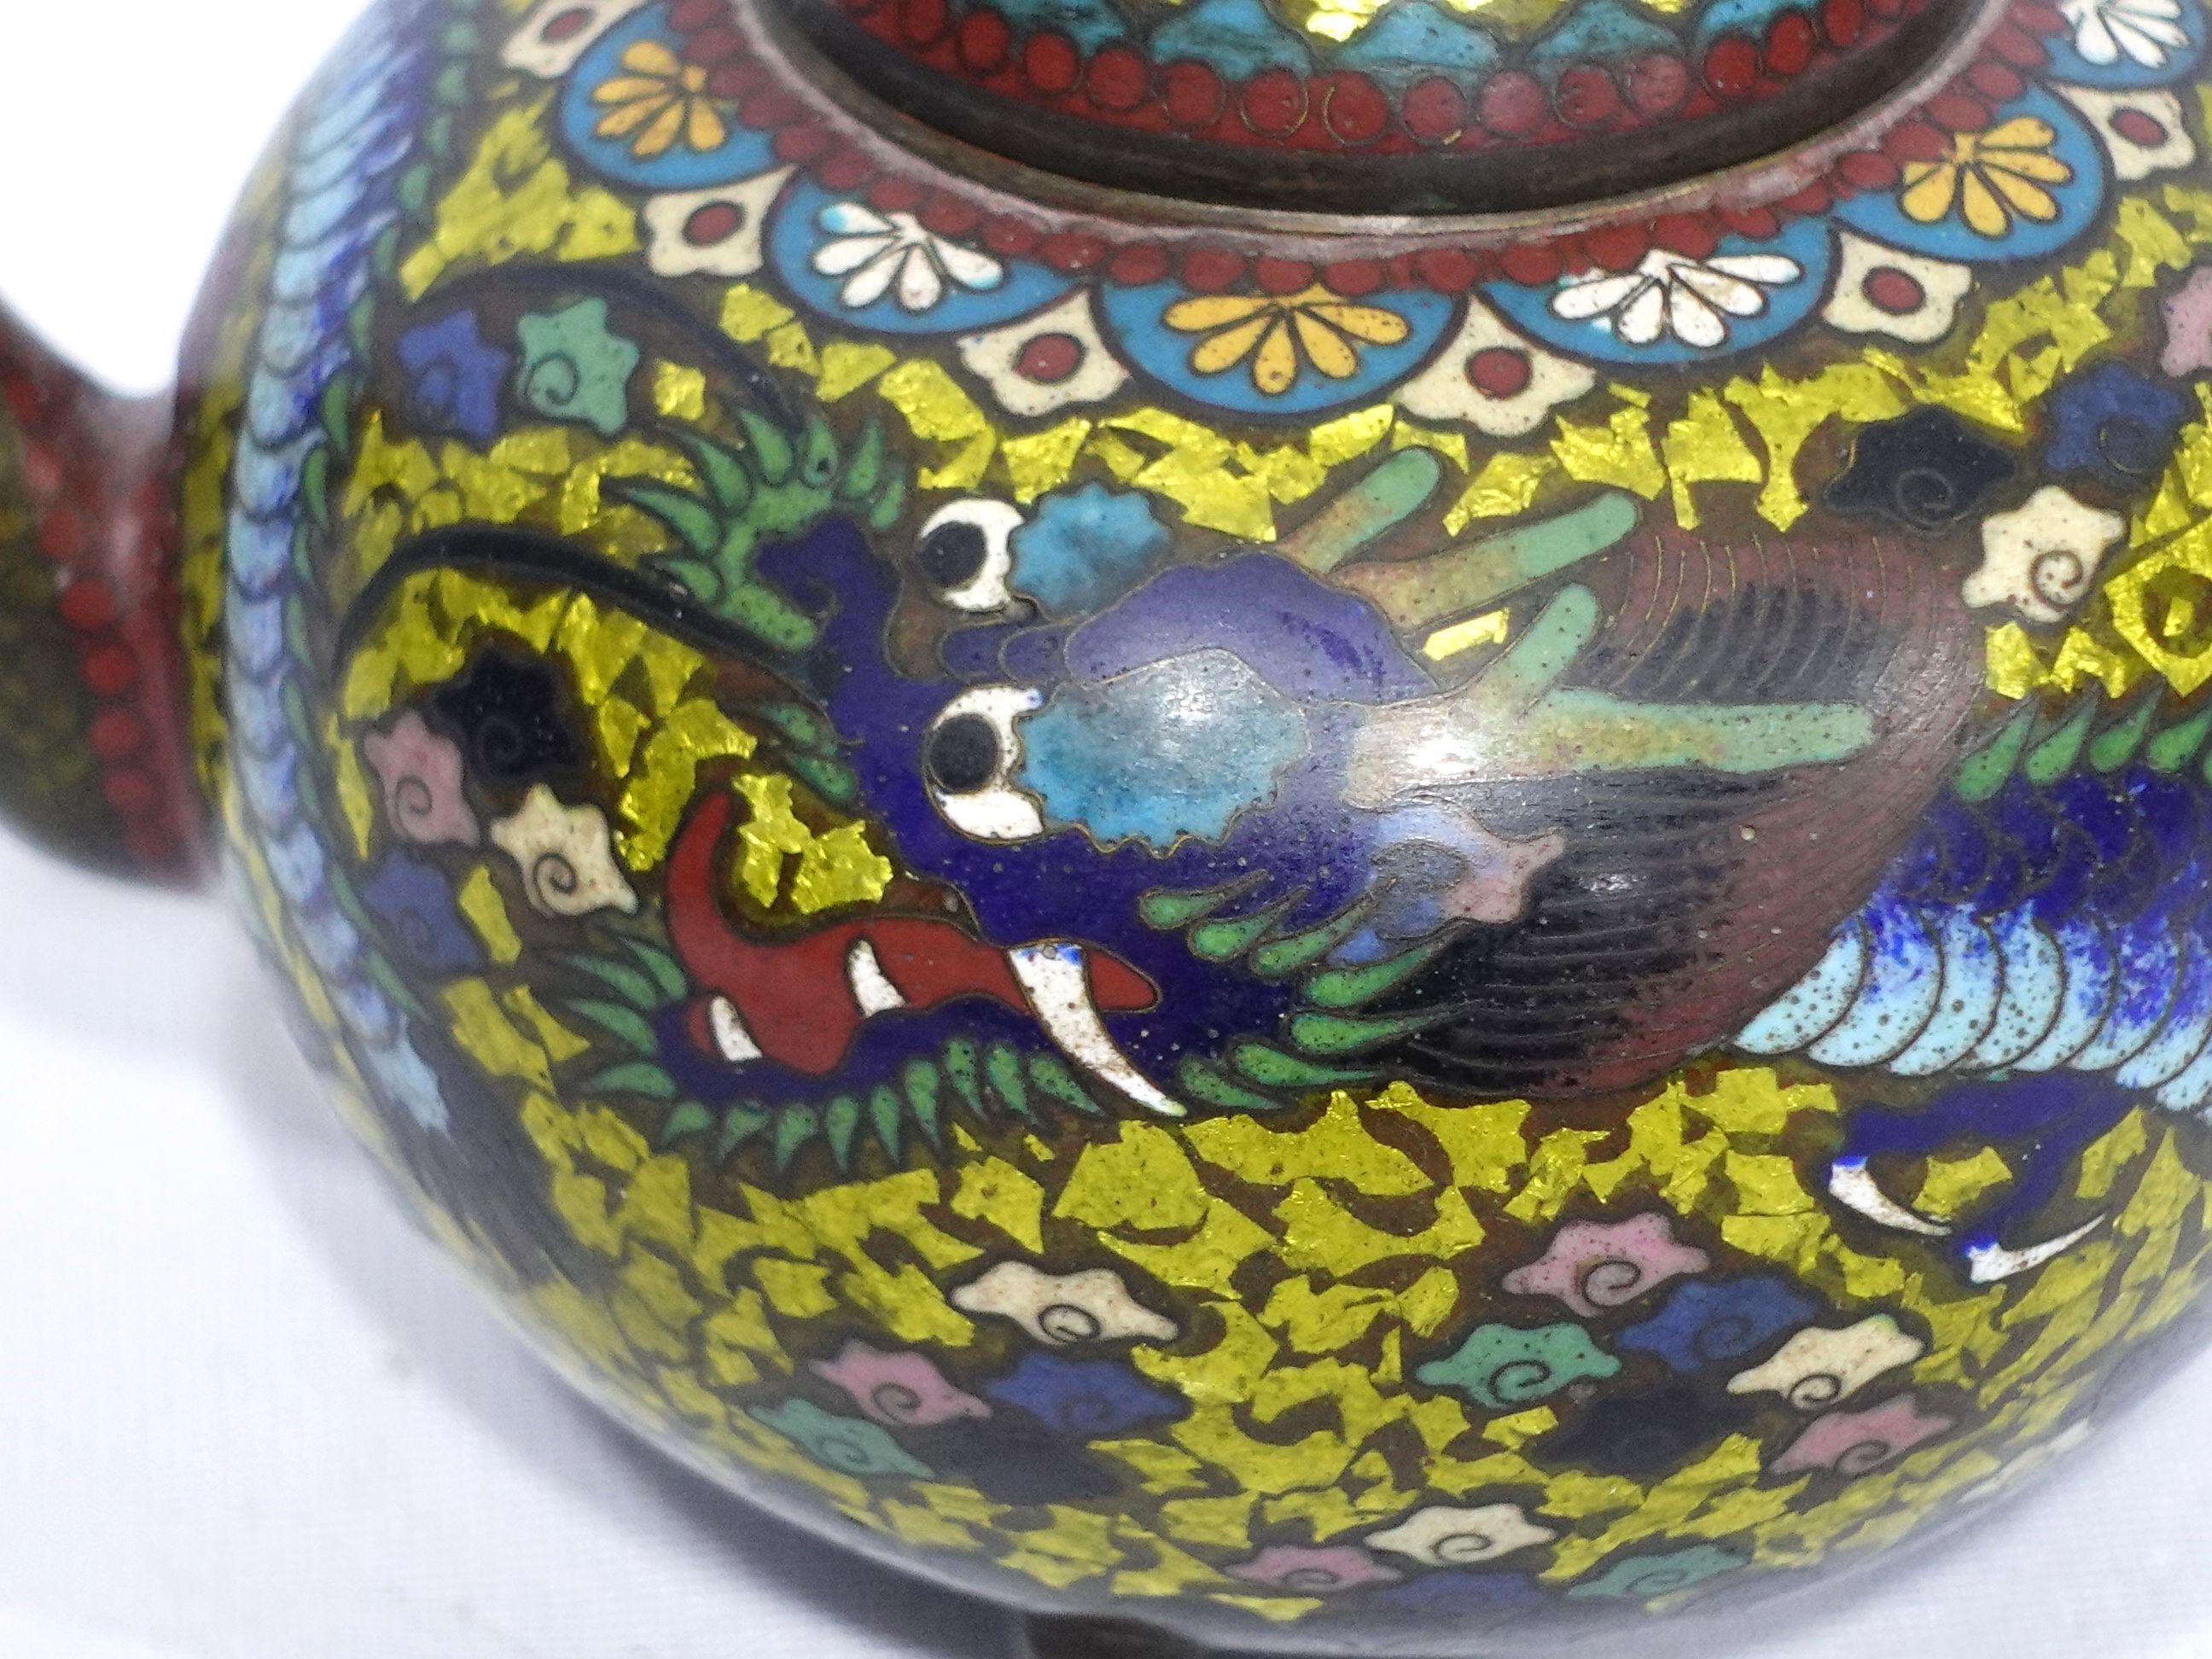 Quality work, amazing workmanship with absolutely fine details bronze cloisonné enameled teapot depicting the scene of a flying dragon with vivid colors of yellow, light golden green, red, blue, and brown, and 3 feet applied underneath.
